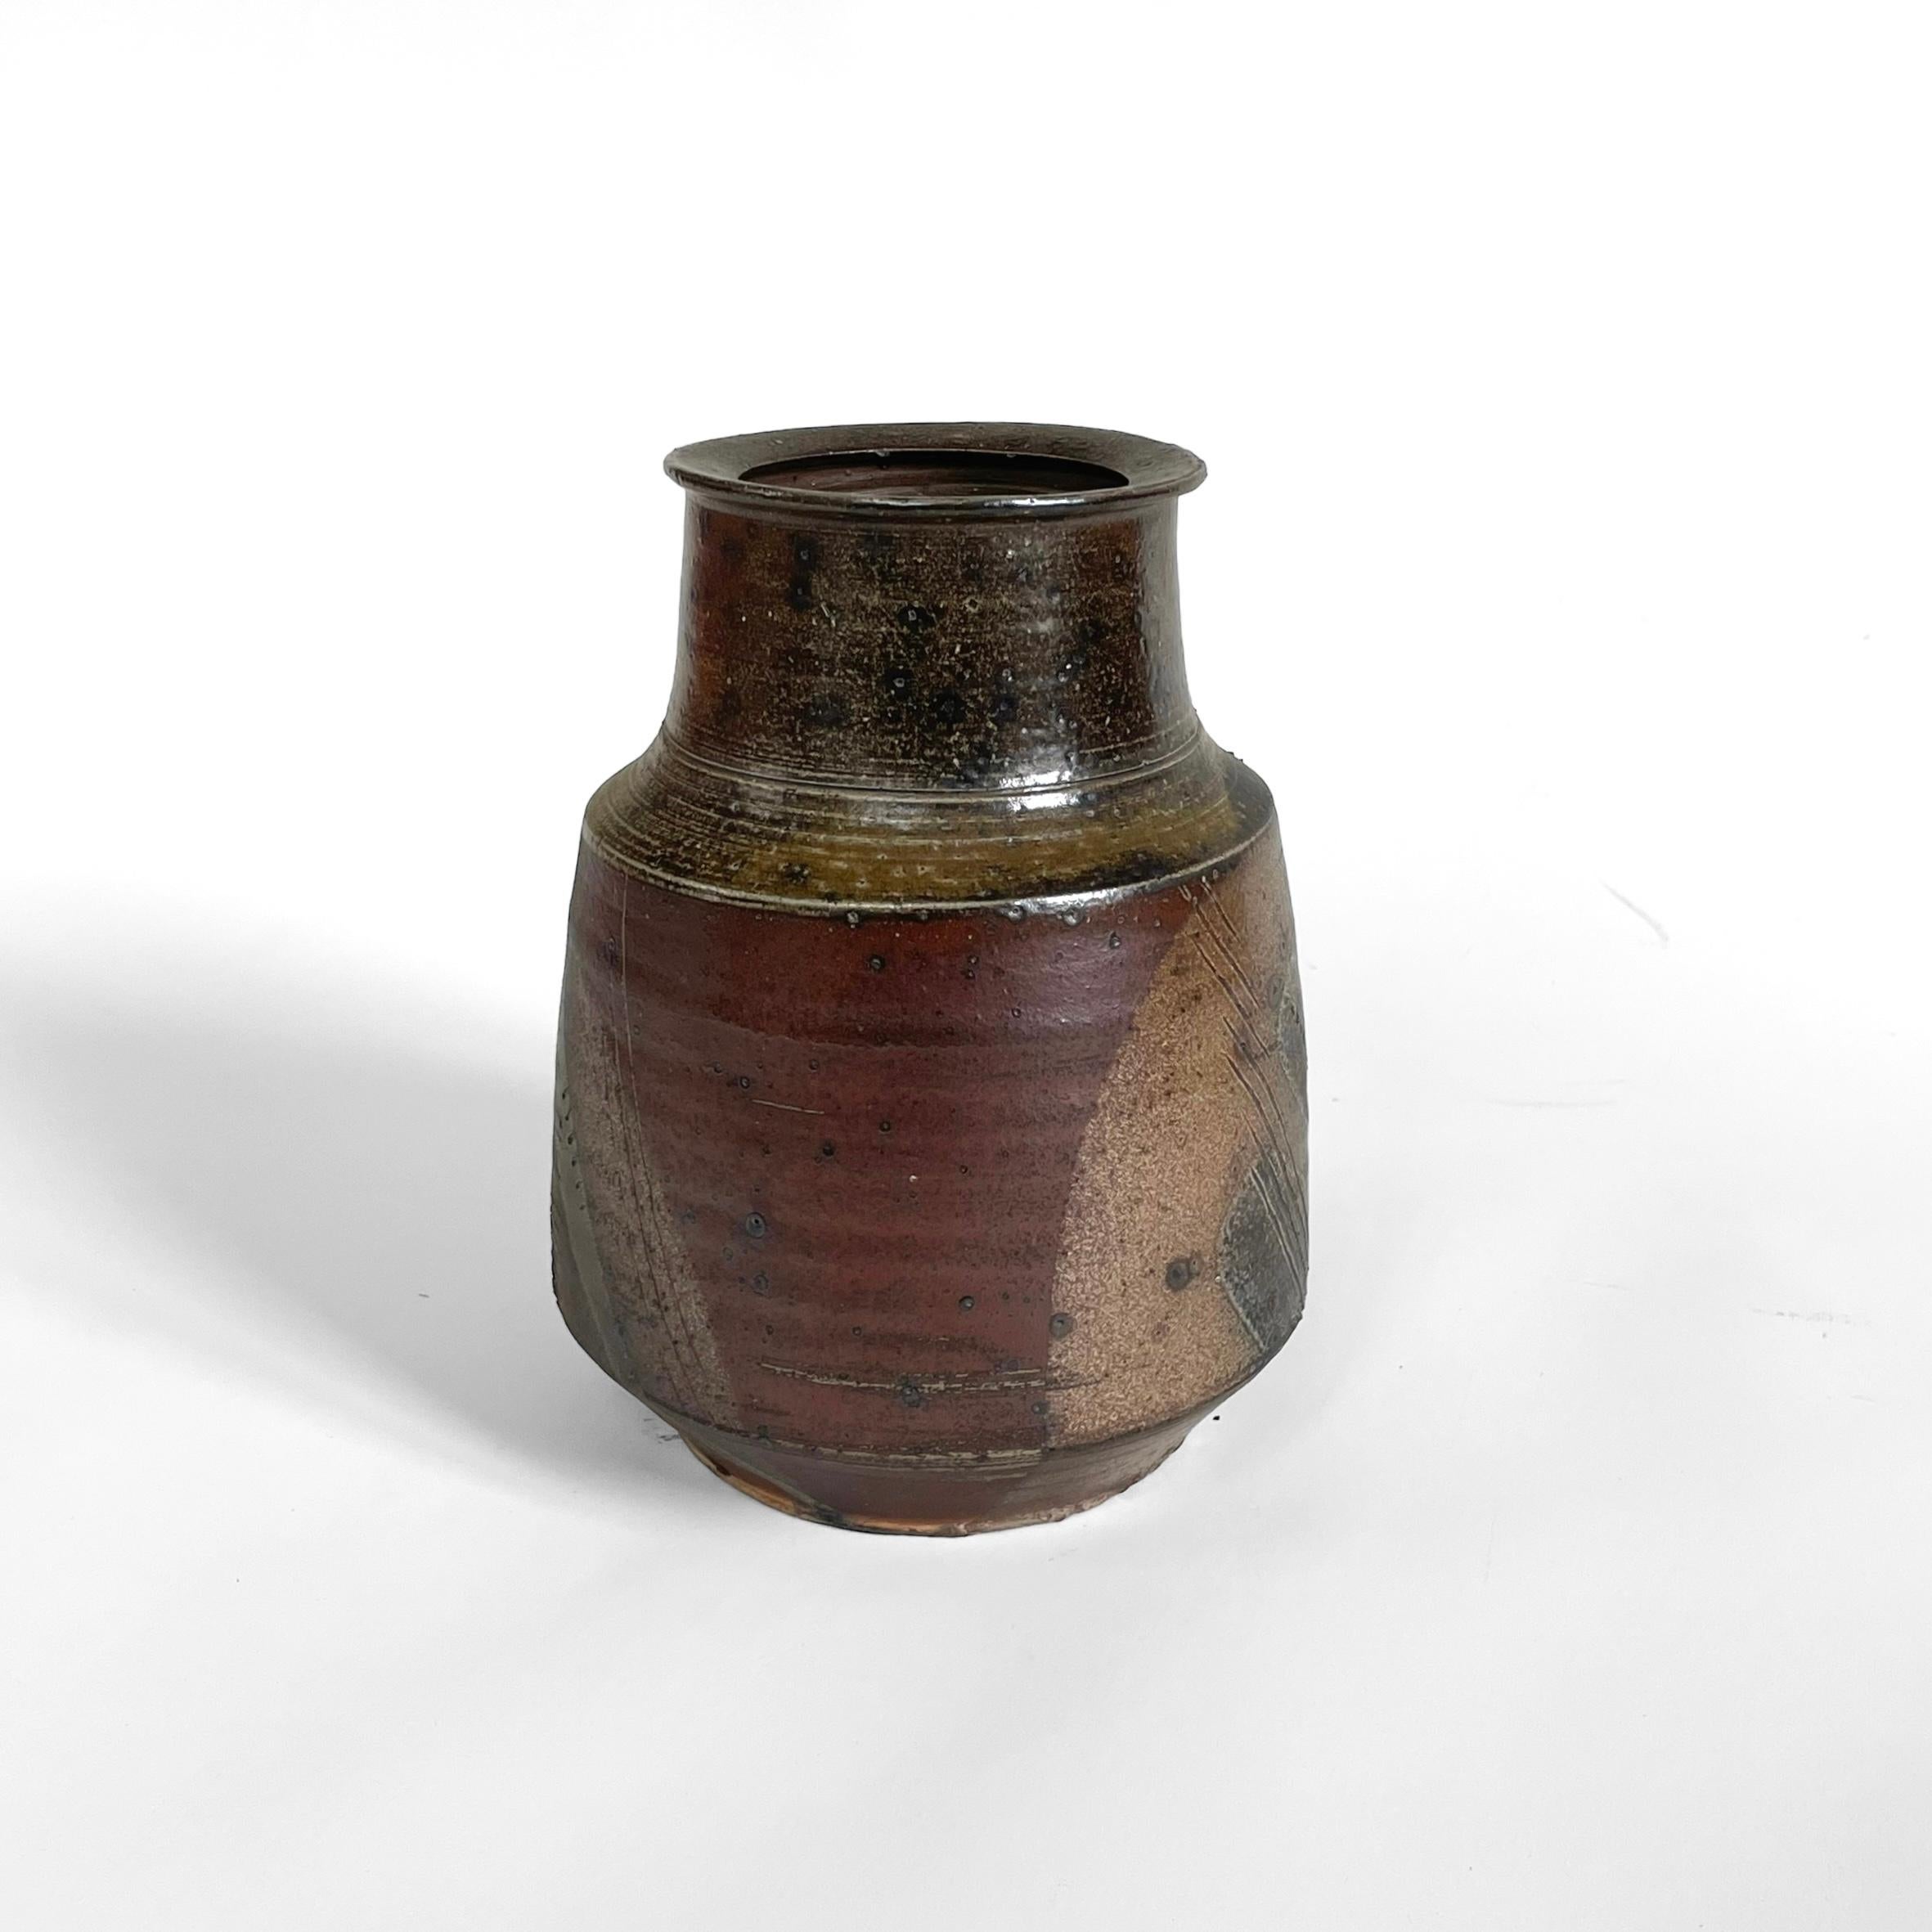 Stoneware vase by Gustave Tiffoche, Guérande, France, circa 1980.
Incised signature “Tiffoche” under the base.
 Perfect condition 

H21cm / 8.27in